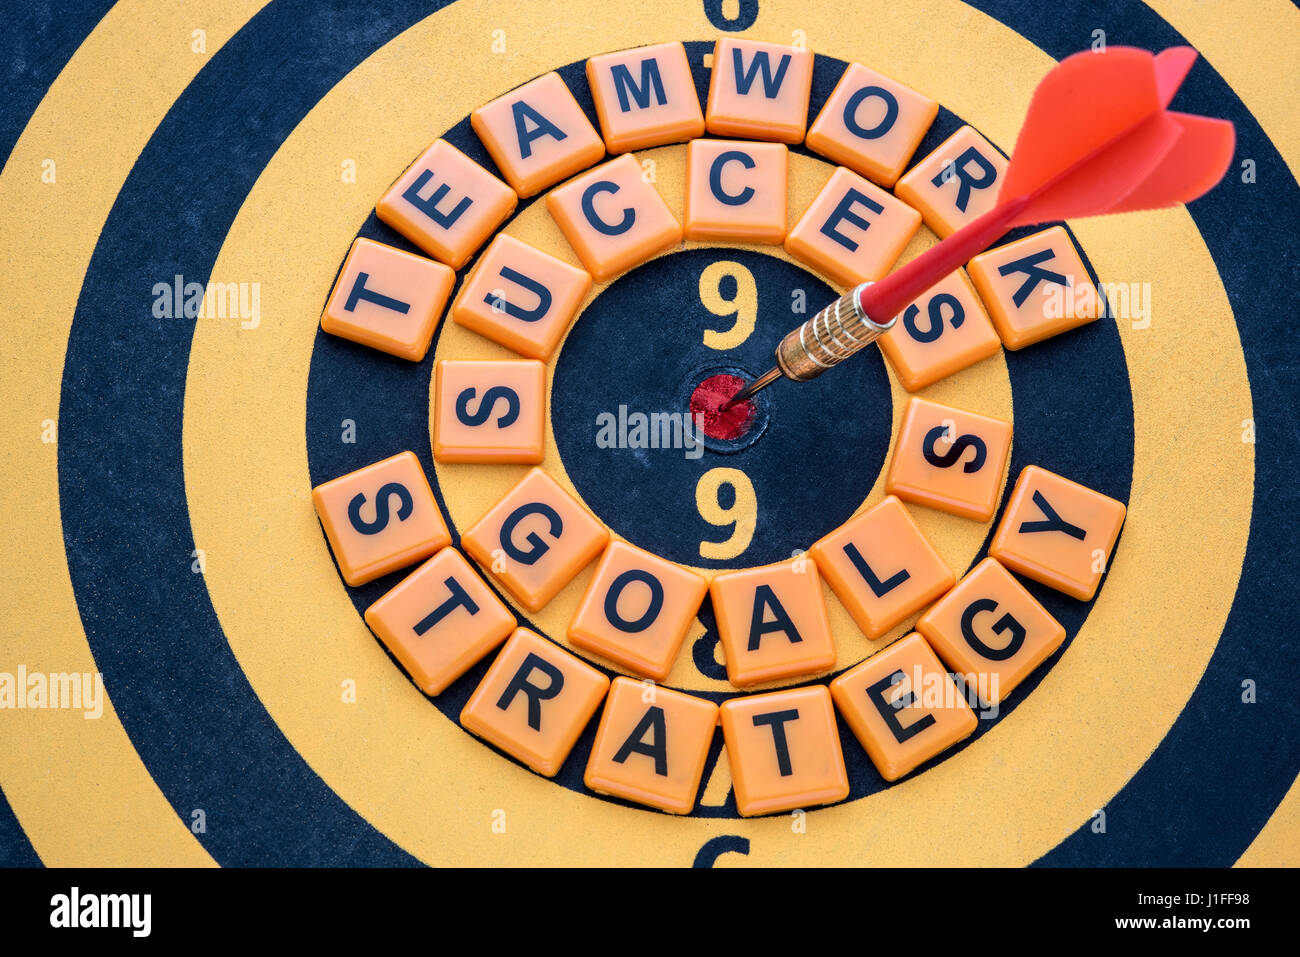 dart target on bullseye with success goals teamwork strategy words, Goal target success business investment financial strategy concept, abstract backg Stock Photo